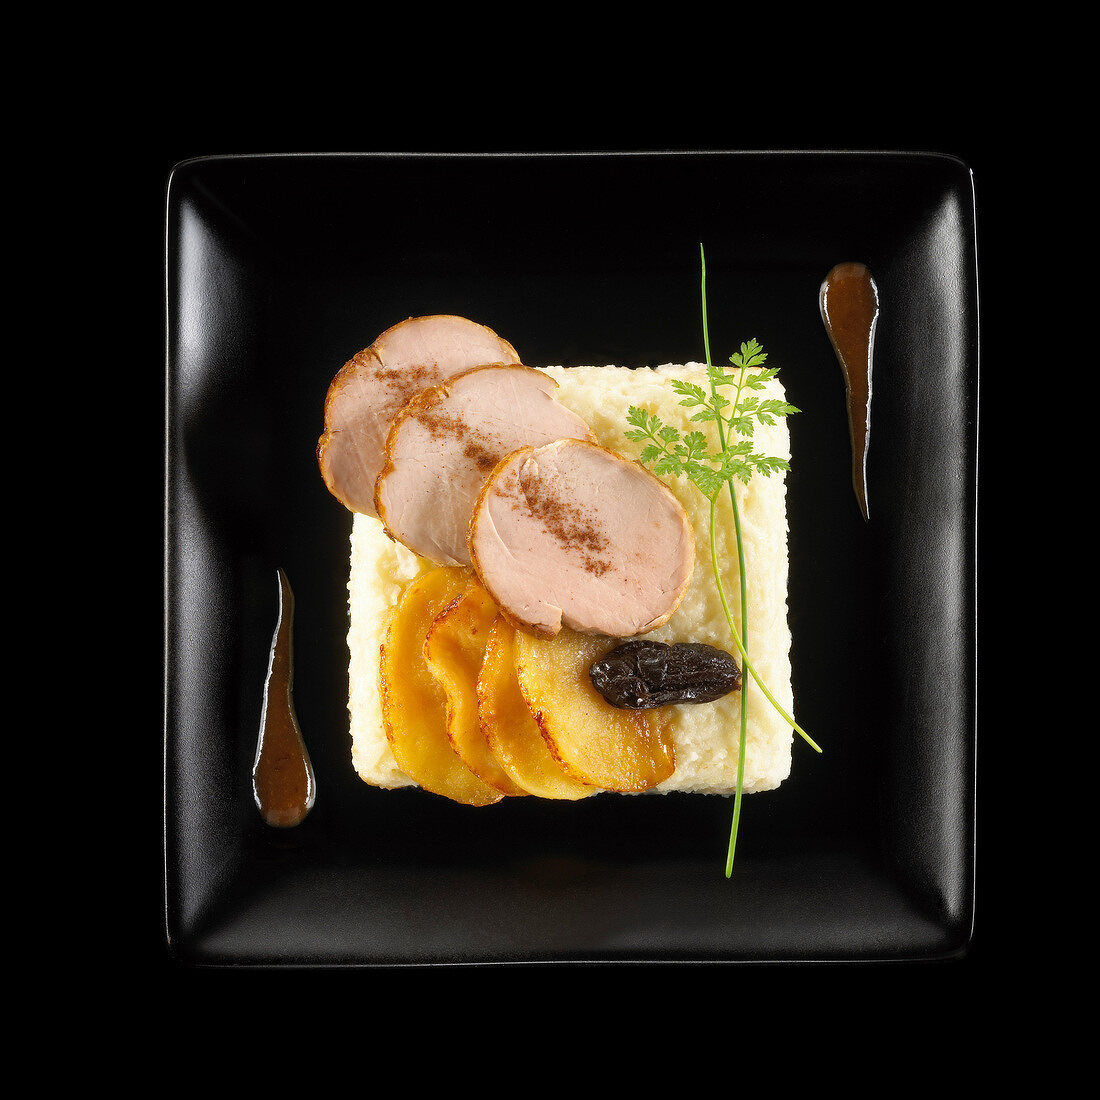 Pan-fried fillets of pork,celeriac mash,sauteed potatoes and prune on a black background